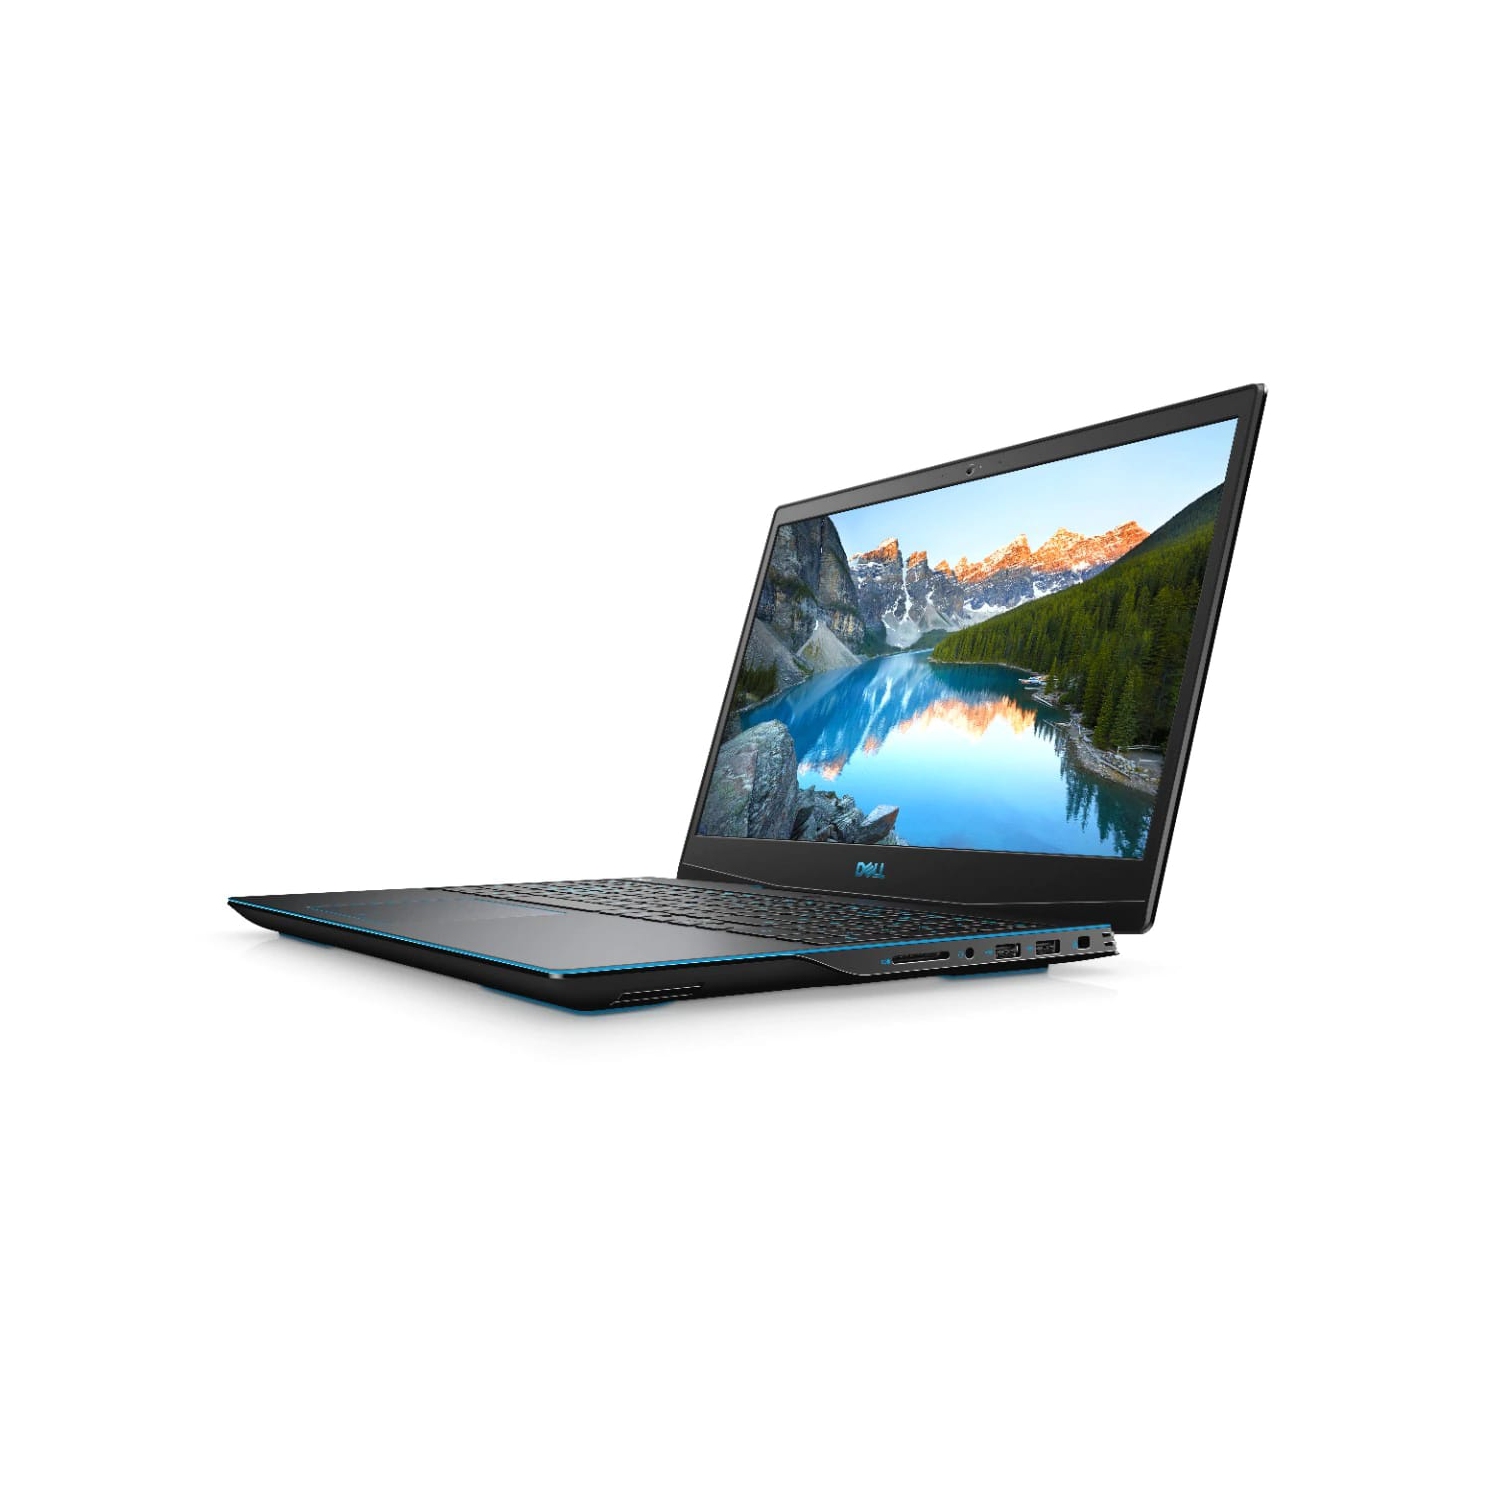 Refurbished (Excellent) – Dell G3 3500 Gaming Laptop (2020) | 15.6" FHD | Core i5 - 256GB SSD - 8GB RAM - GTX 1650 | 4 Cores @ 4.5 GHz - 10th Gen CPU